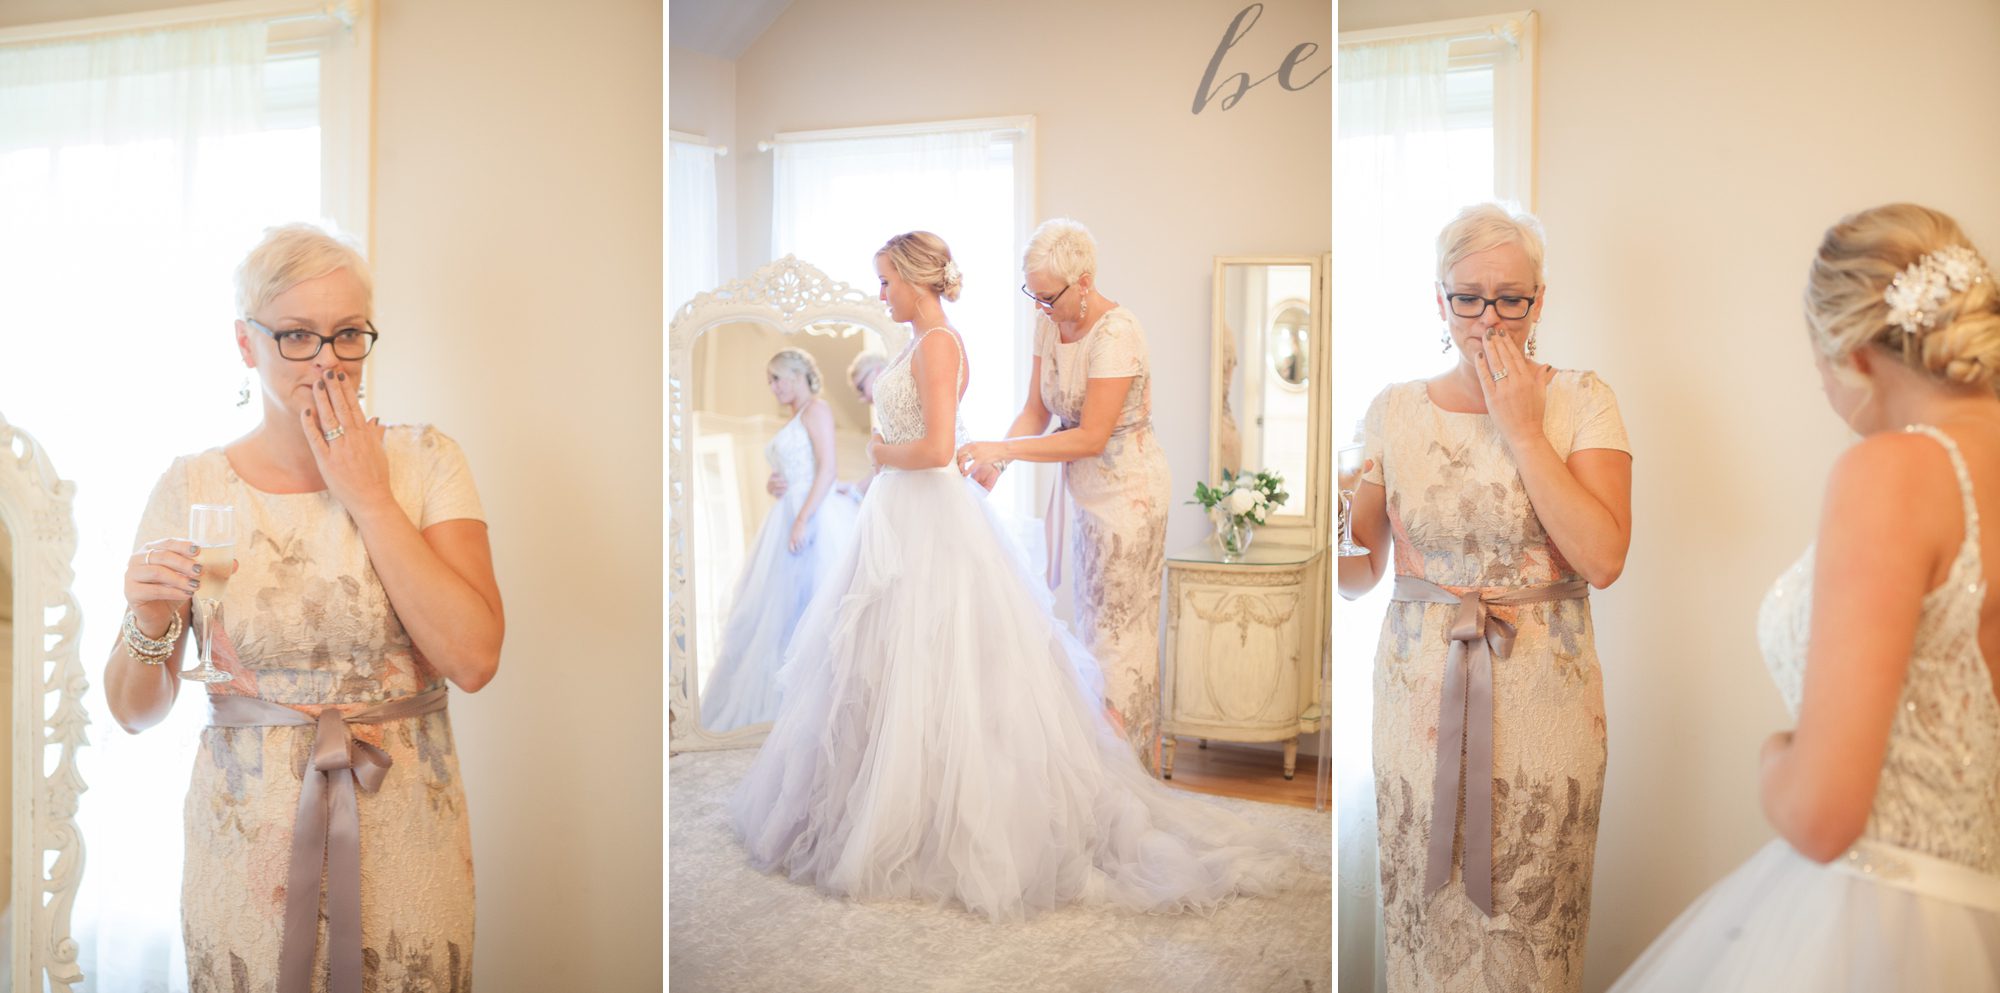 Bride and mom getting ready. Wedding photography at Cedarwood Weddings and Estate in Nashville, TN photography by Krista Lee Photography